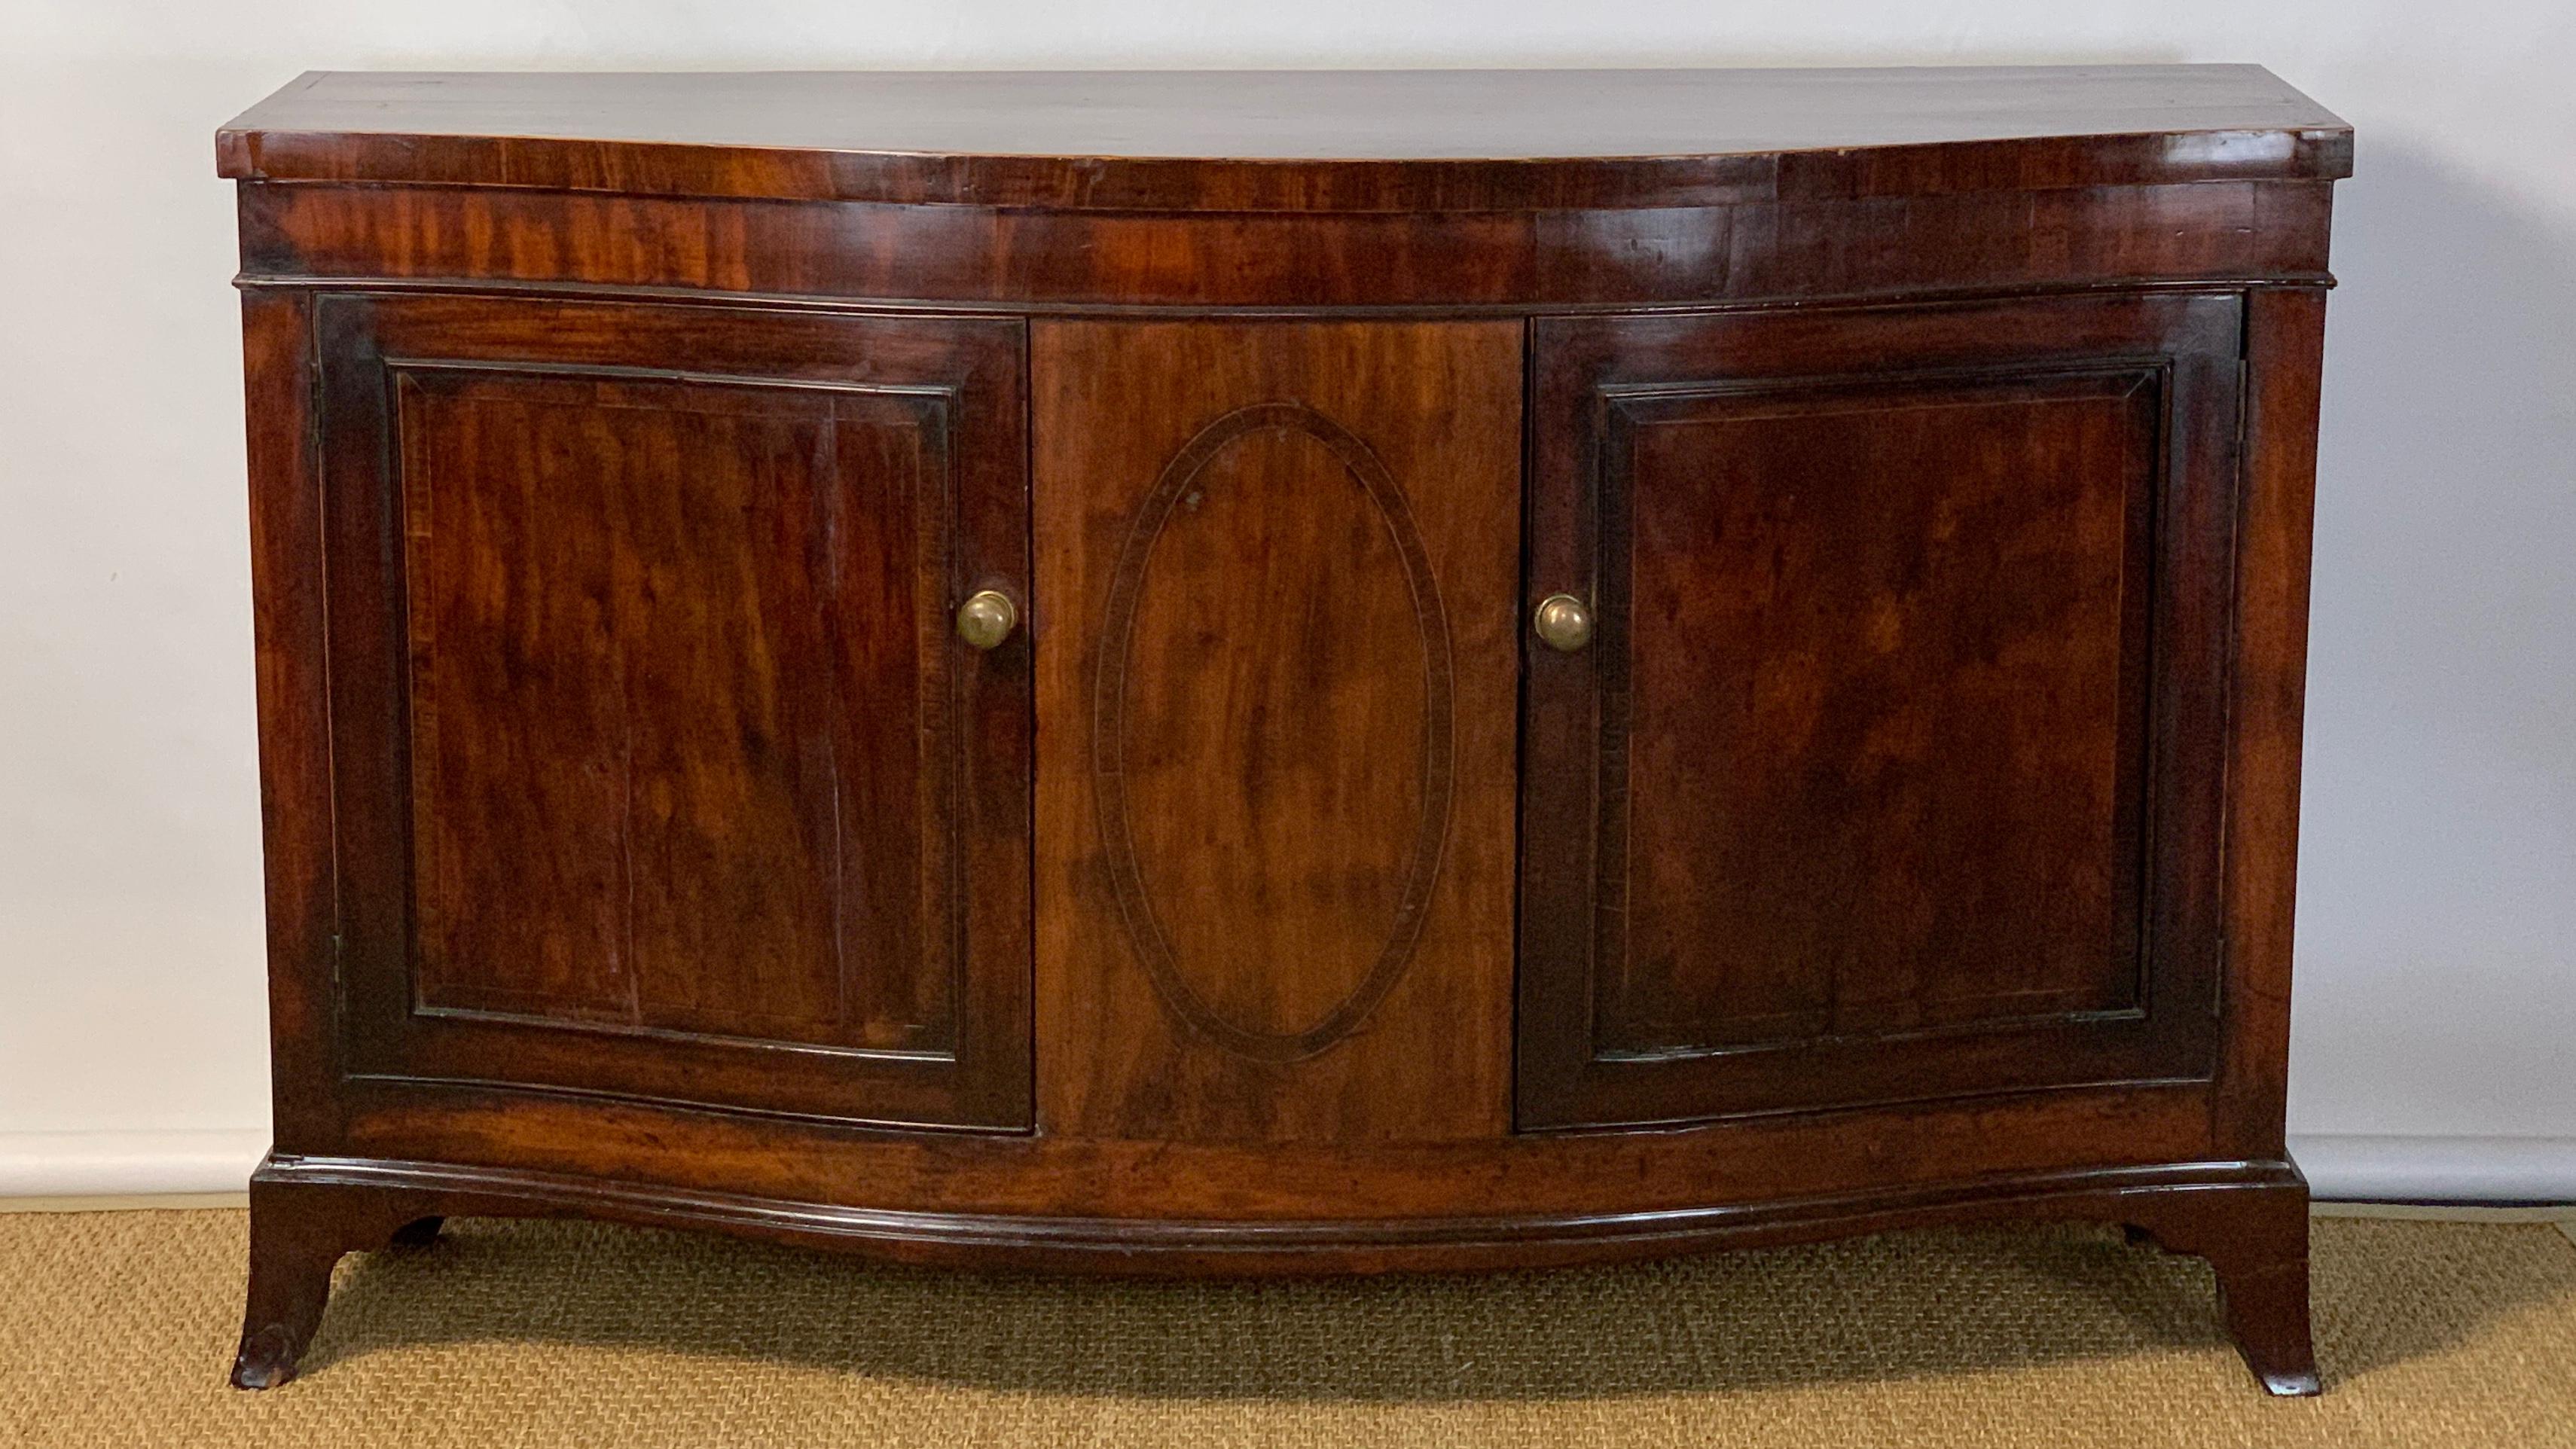 A large and elegant late 18th century mahogany serpentine fronted two door side cabinet or credenza, the interior revealing two large shelves accented with original brass hardware and resting on French splayed feet. The early stamp on the back